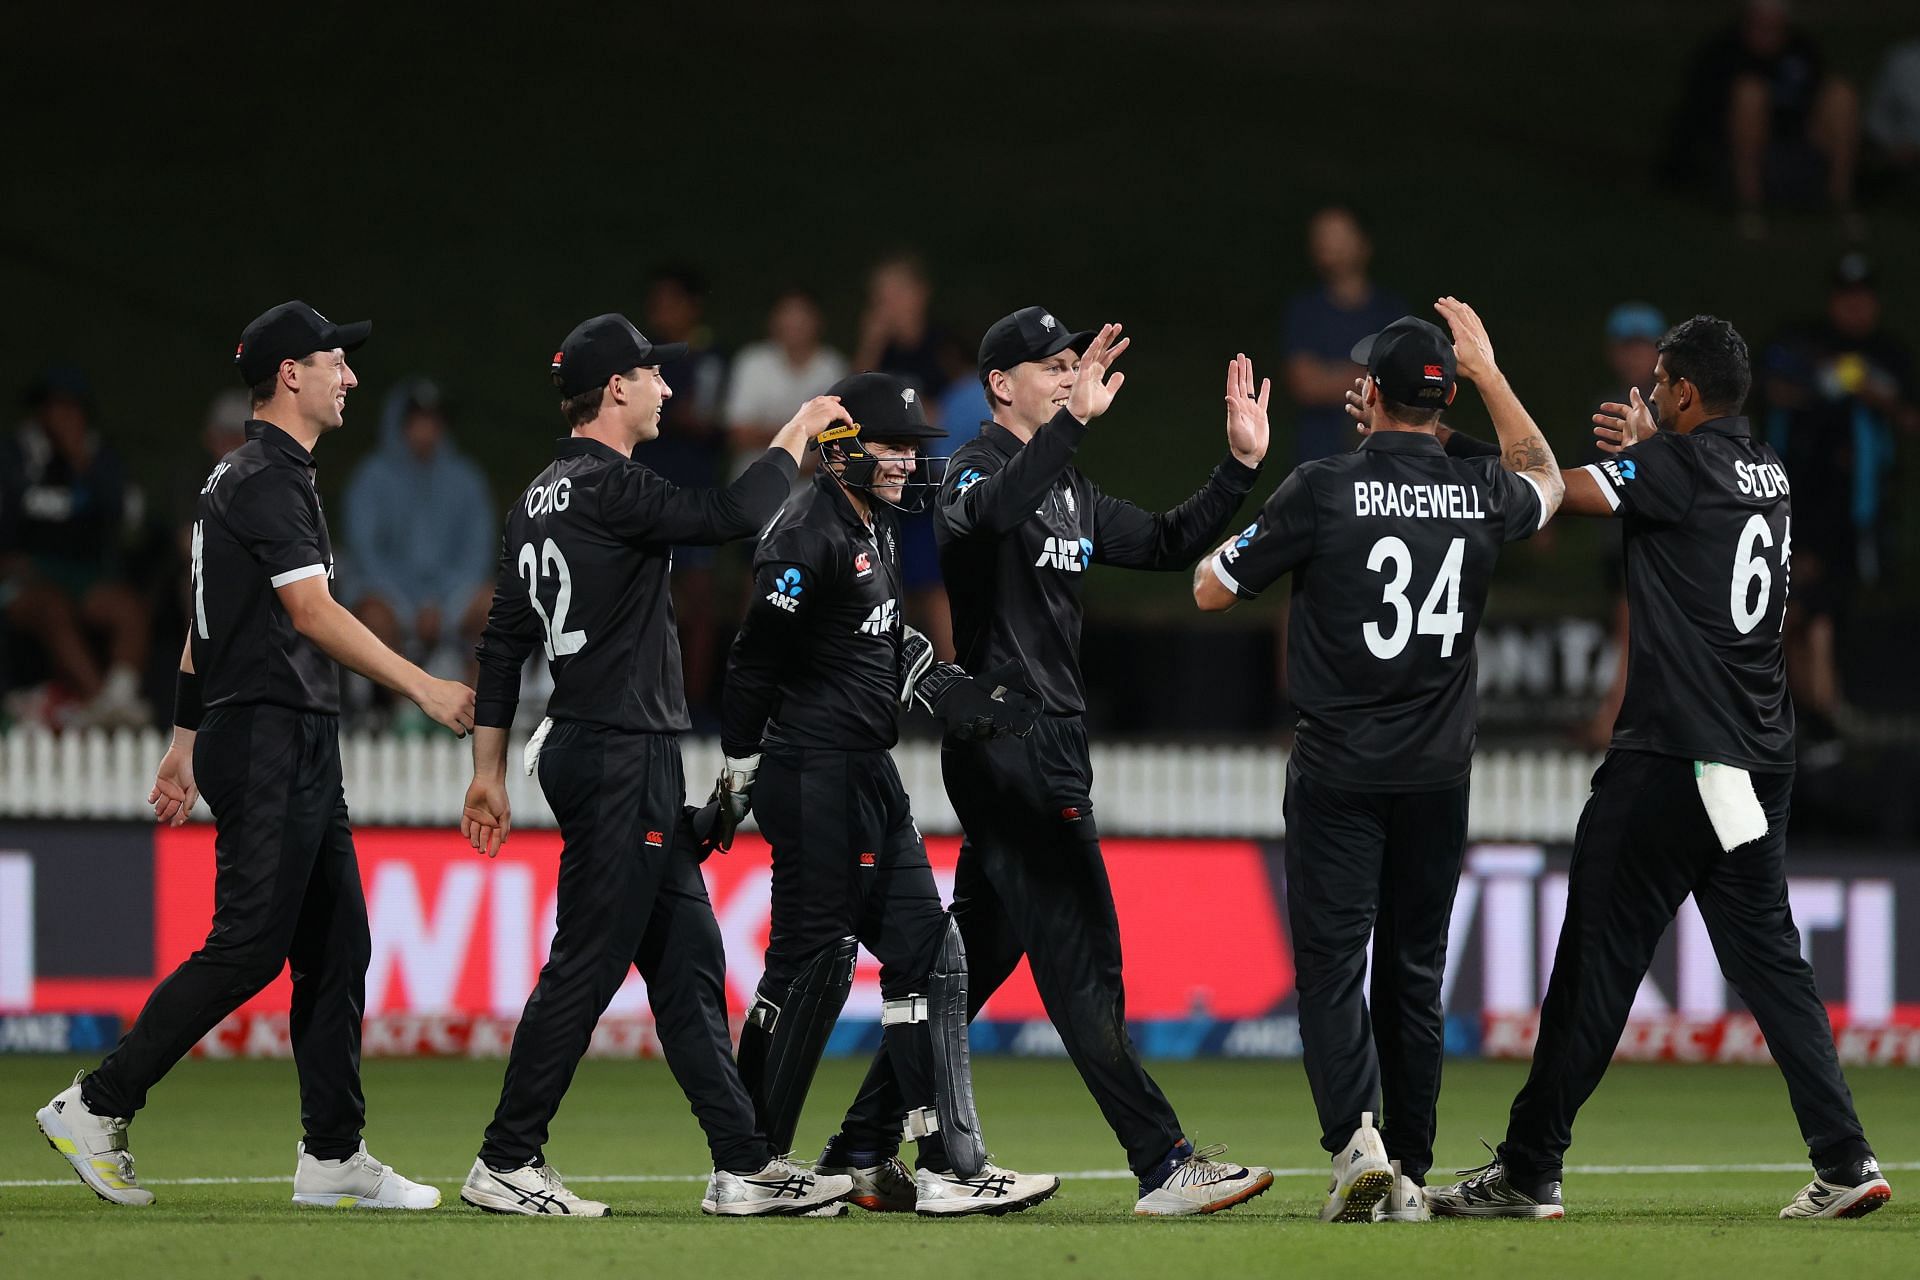 Ireland vs New Zealand, 1st T20I Probable XIs, Match Prediction, Pitch Report, Weather Forecast and Live Streaming Details